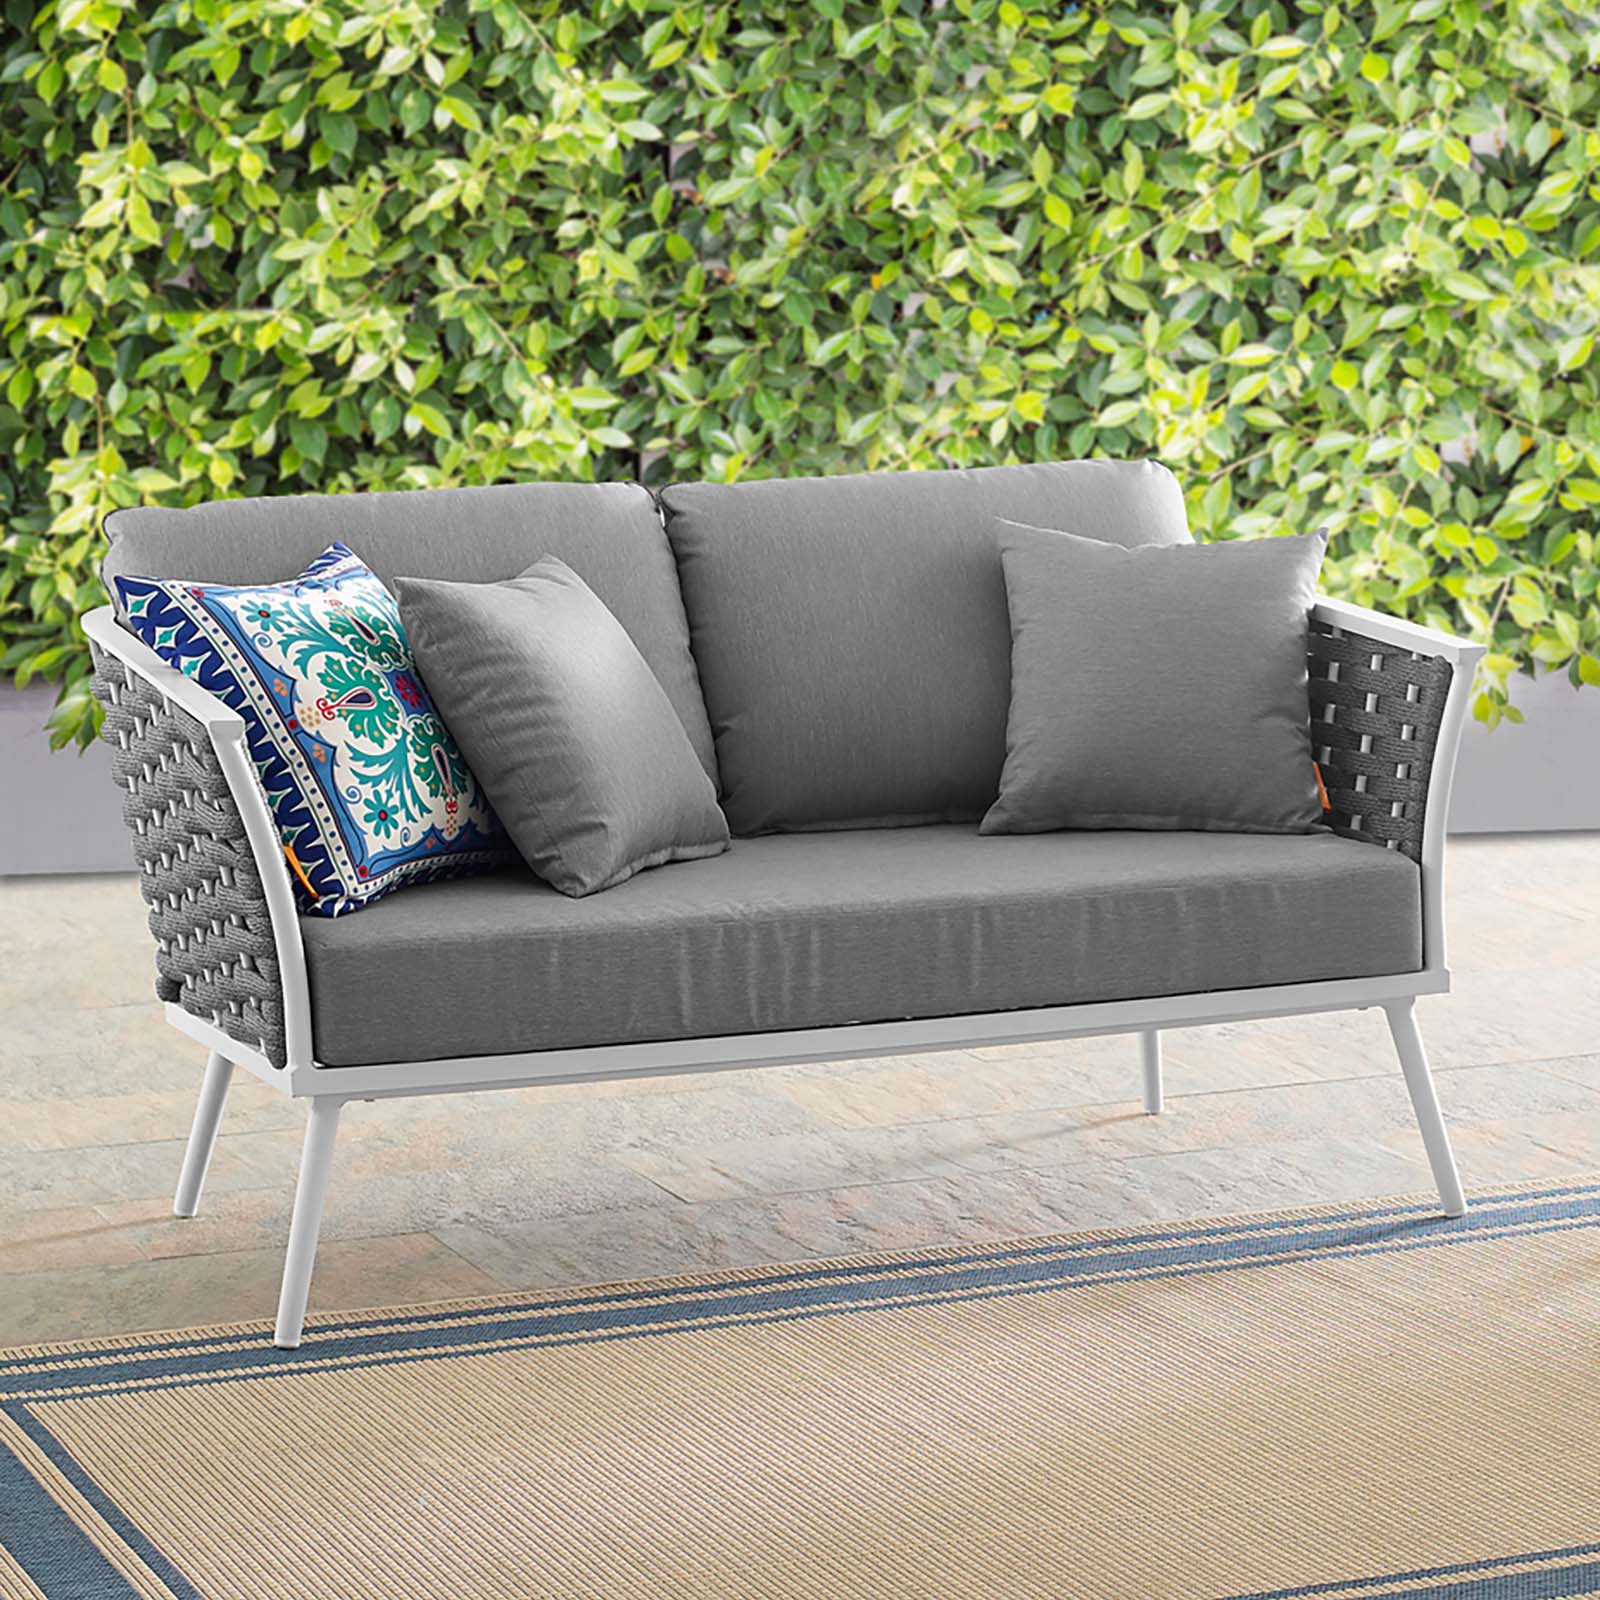 Modway Outdoor Sofas - Stance Outdoor Loveseat White & Gray